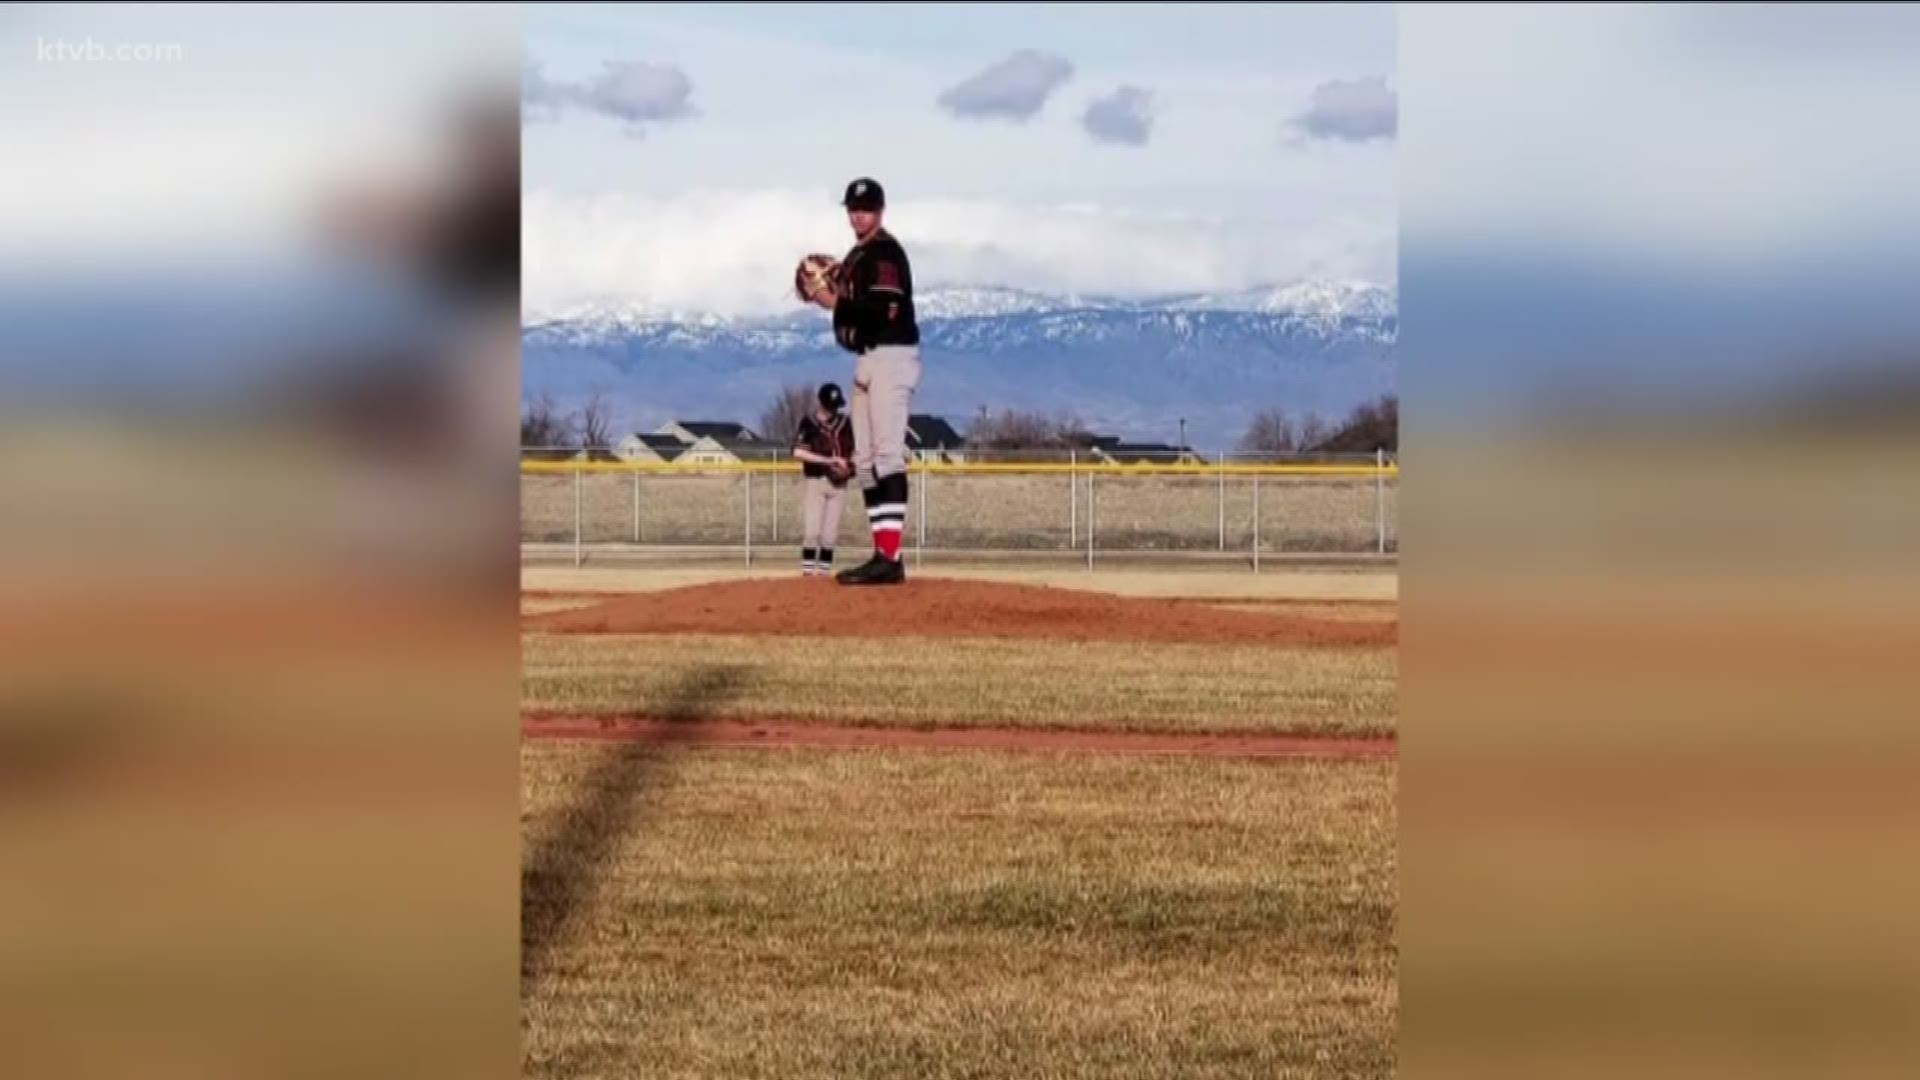 Baseball player recovering after brain injury.